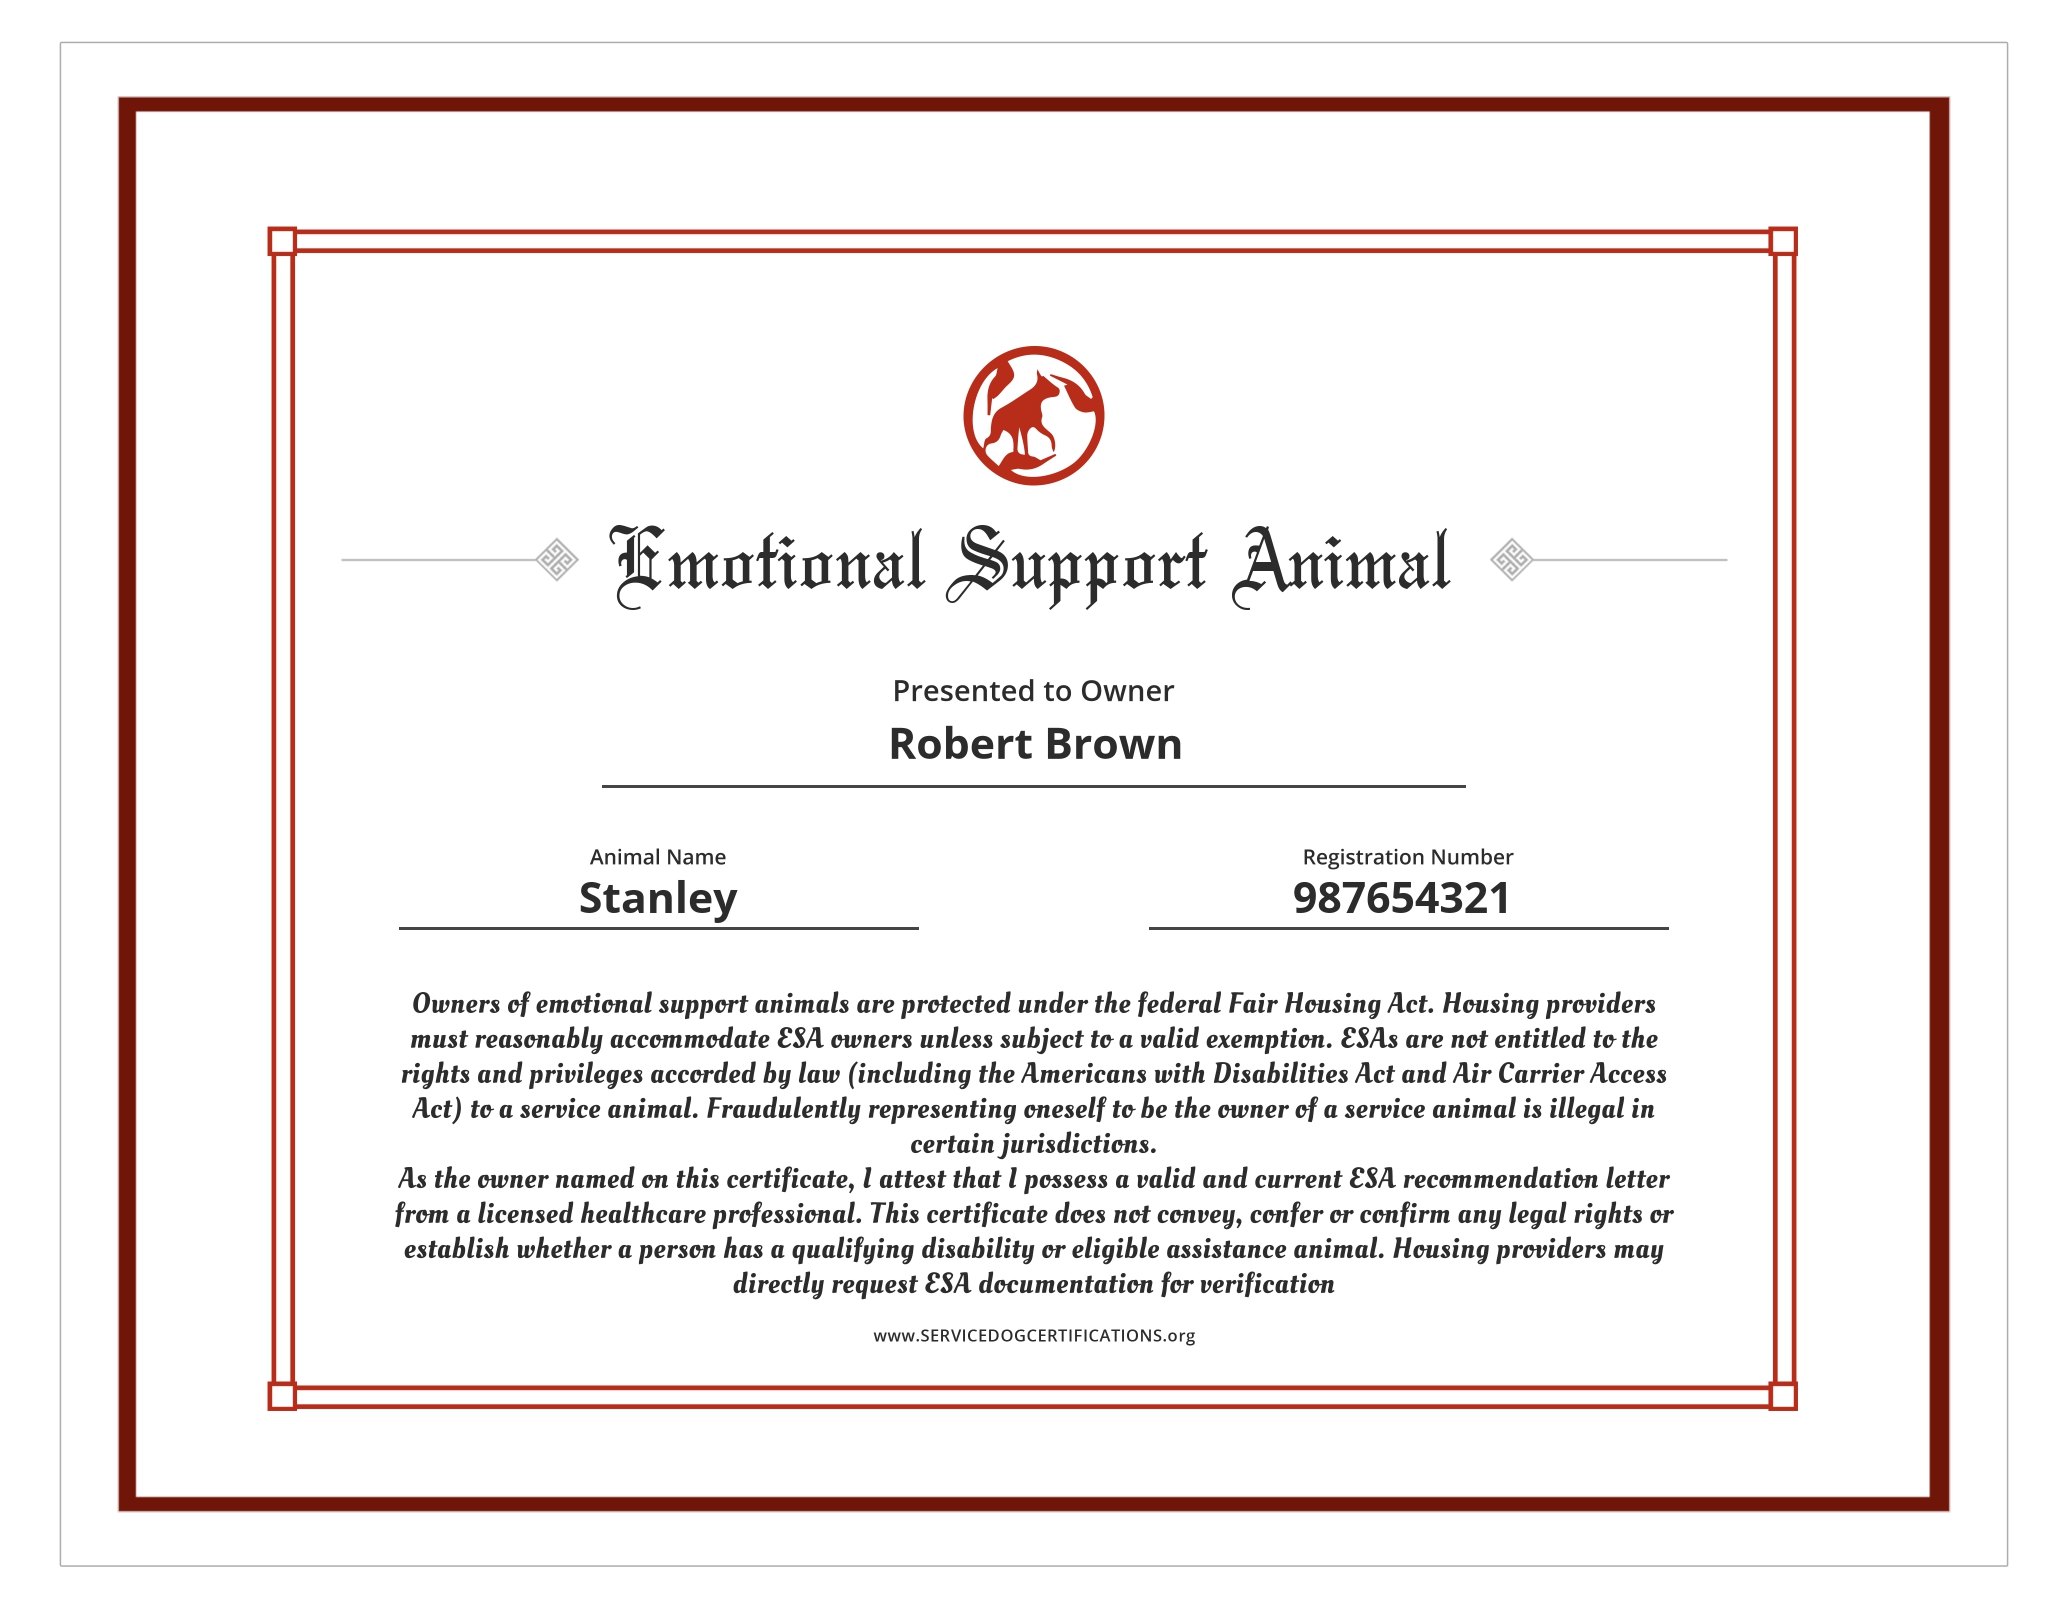 Emotional Support Animal ID Service Dog Certifications